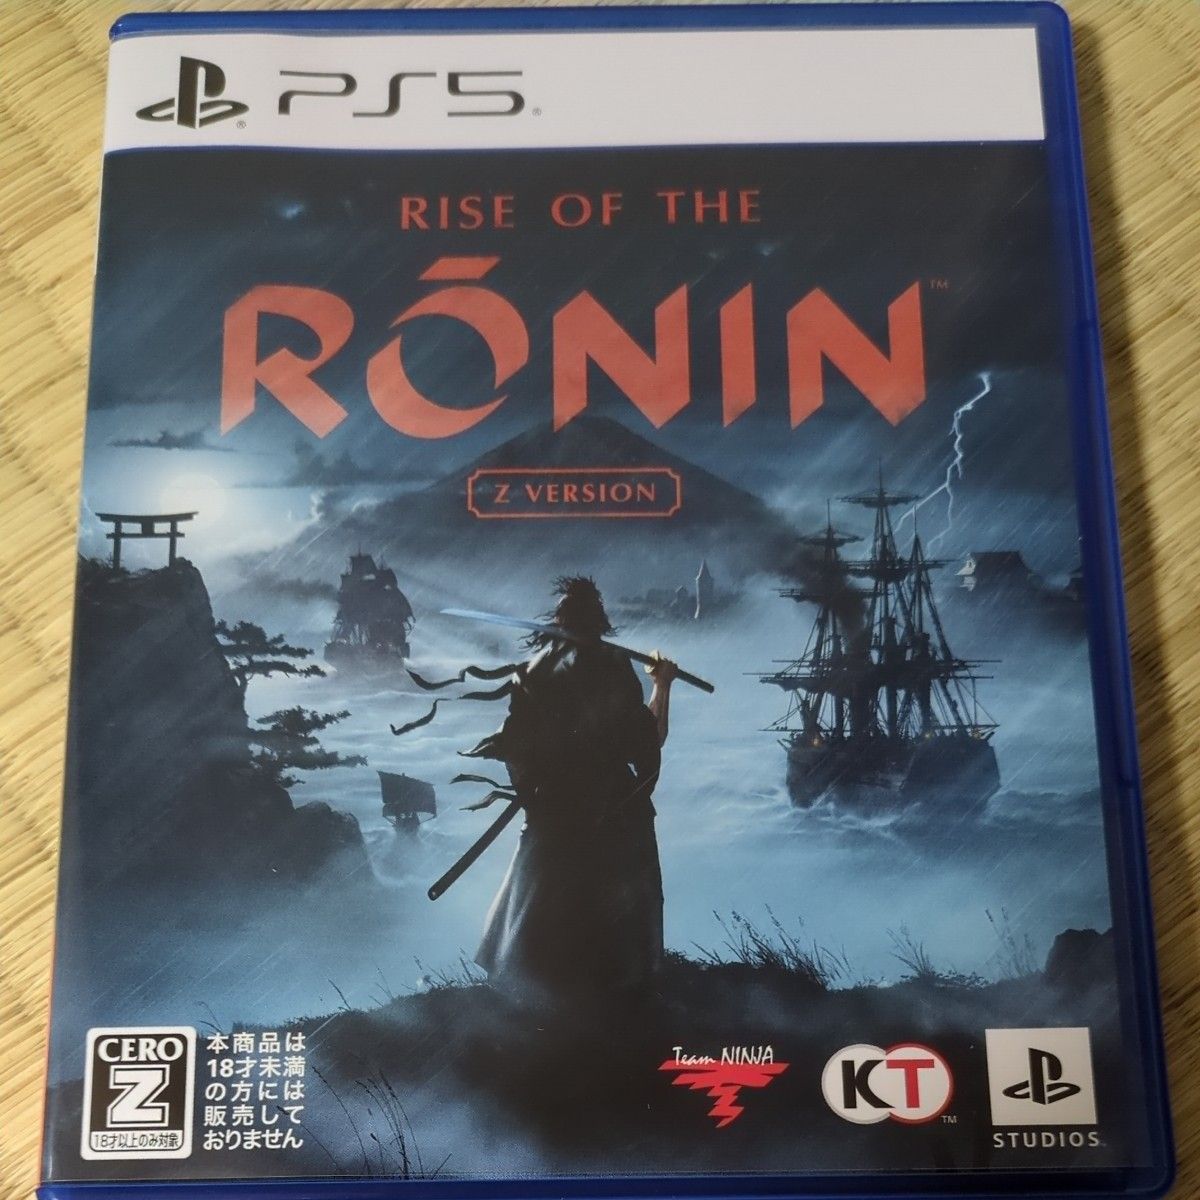 ［PS5］RISE OF THE RONIN Z VERSION  ローニン